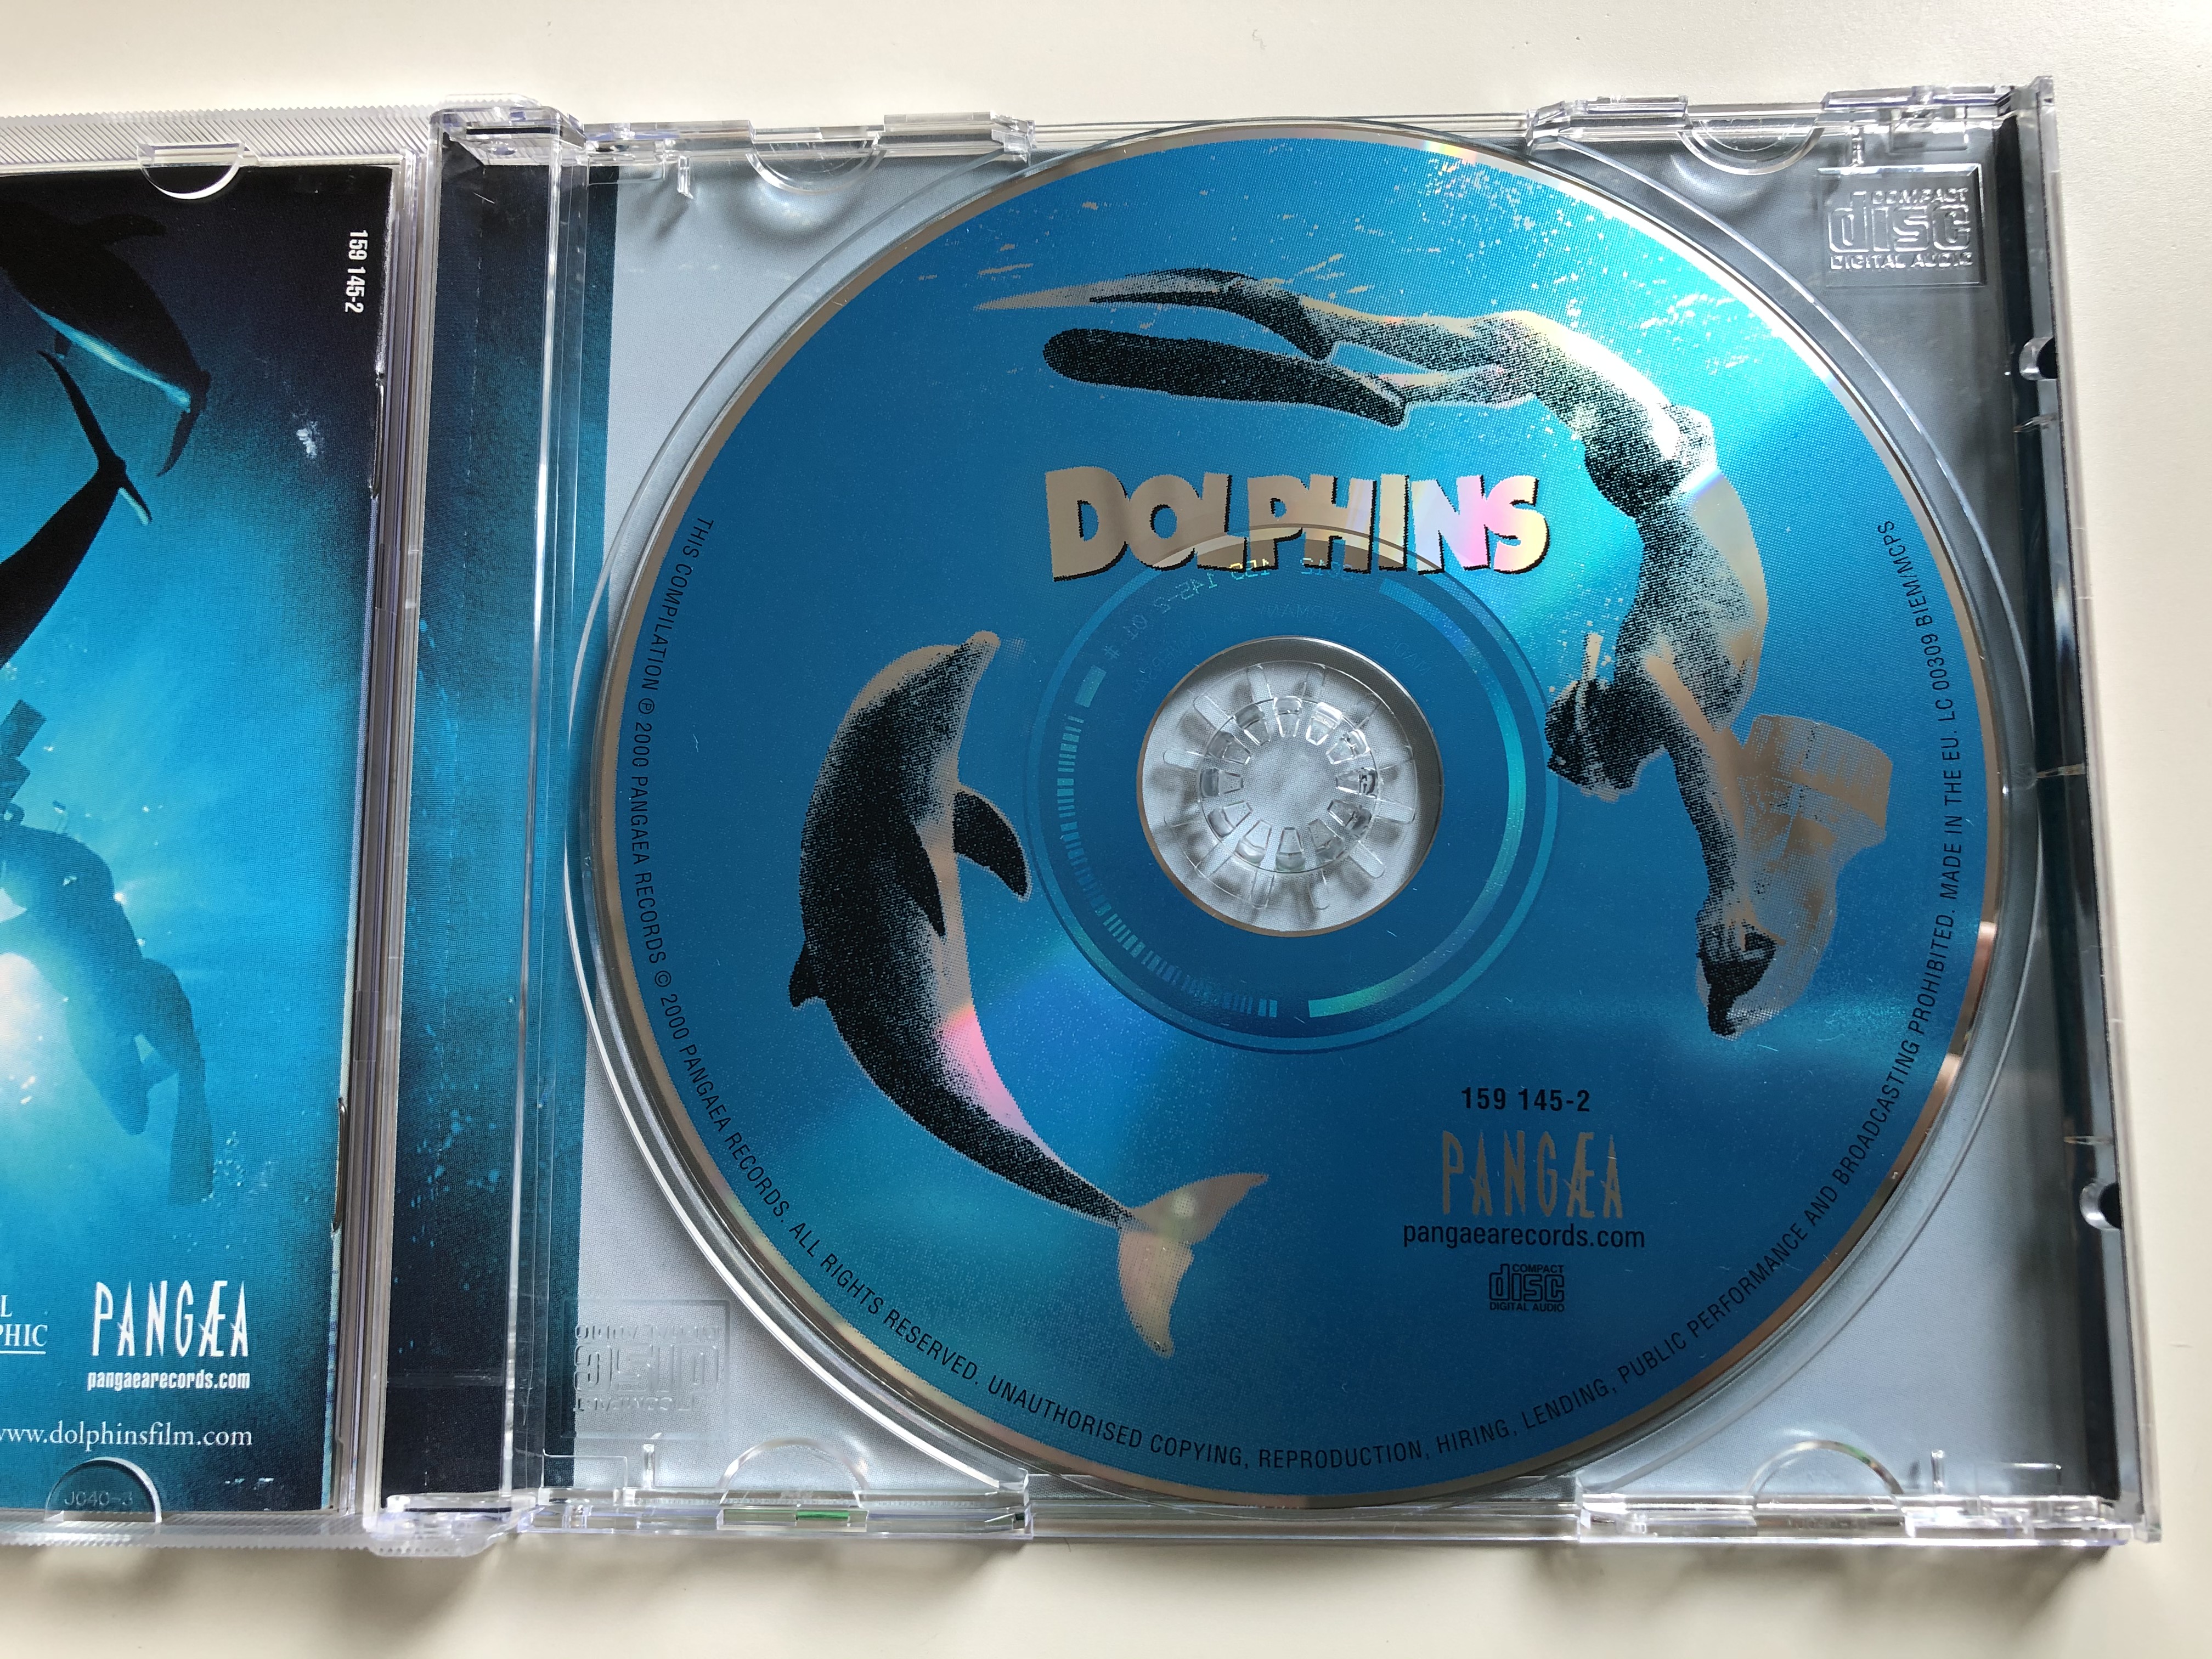 soundtrack-from-the-imax-theatre-film-dolphins-featuring-the-music-of-sting-original-score-arrangements-by-steve-wood-a-macgillivray-freeman-film-pang-a-audio-cd-2000-159-145-2-10-.jpg